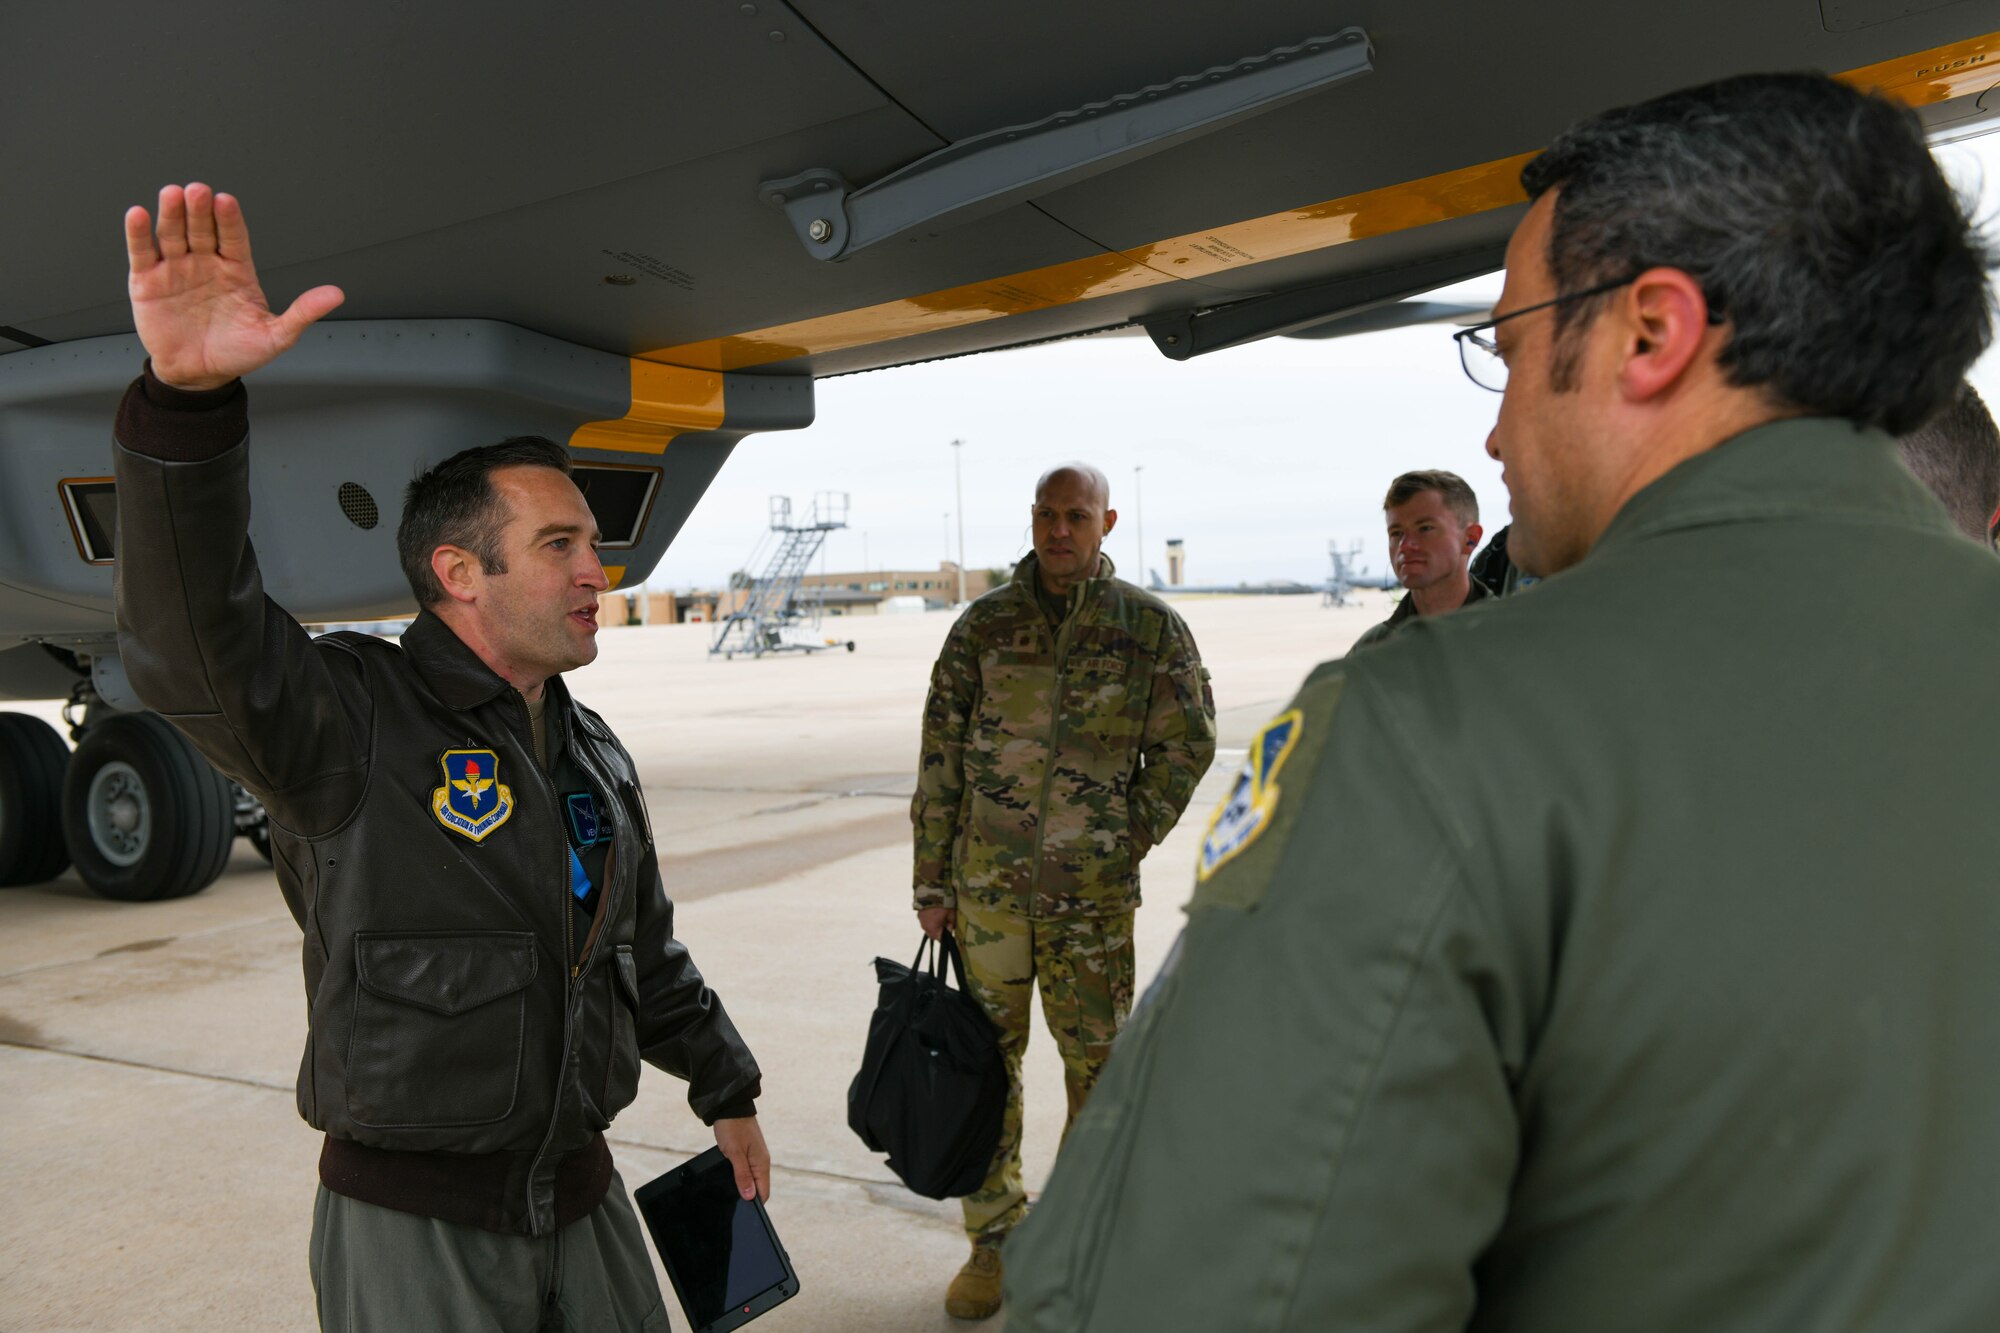 U.S. Air Force Maj. Maximilian Robidoux, 56th Air Refueling Squadron assistant director of operations, talks to members of the 552nd Operations Group (OG) about the KC-46 Pegasus on Altus Air Force Base, Oklahoma, Nov. 2, 2021. As a part of their visit, the members of the 552nd OG were shown around the KC-46 and the systems aboard the aircraft. (U.S. Air Force photo by Airman 1st Class Trenton Jancze)